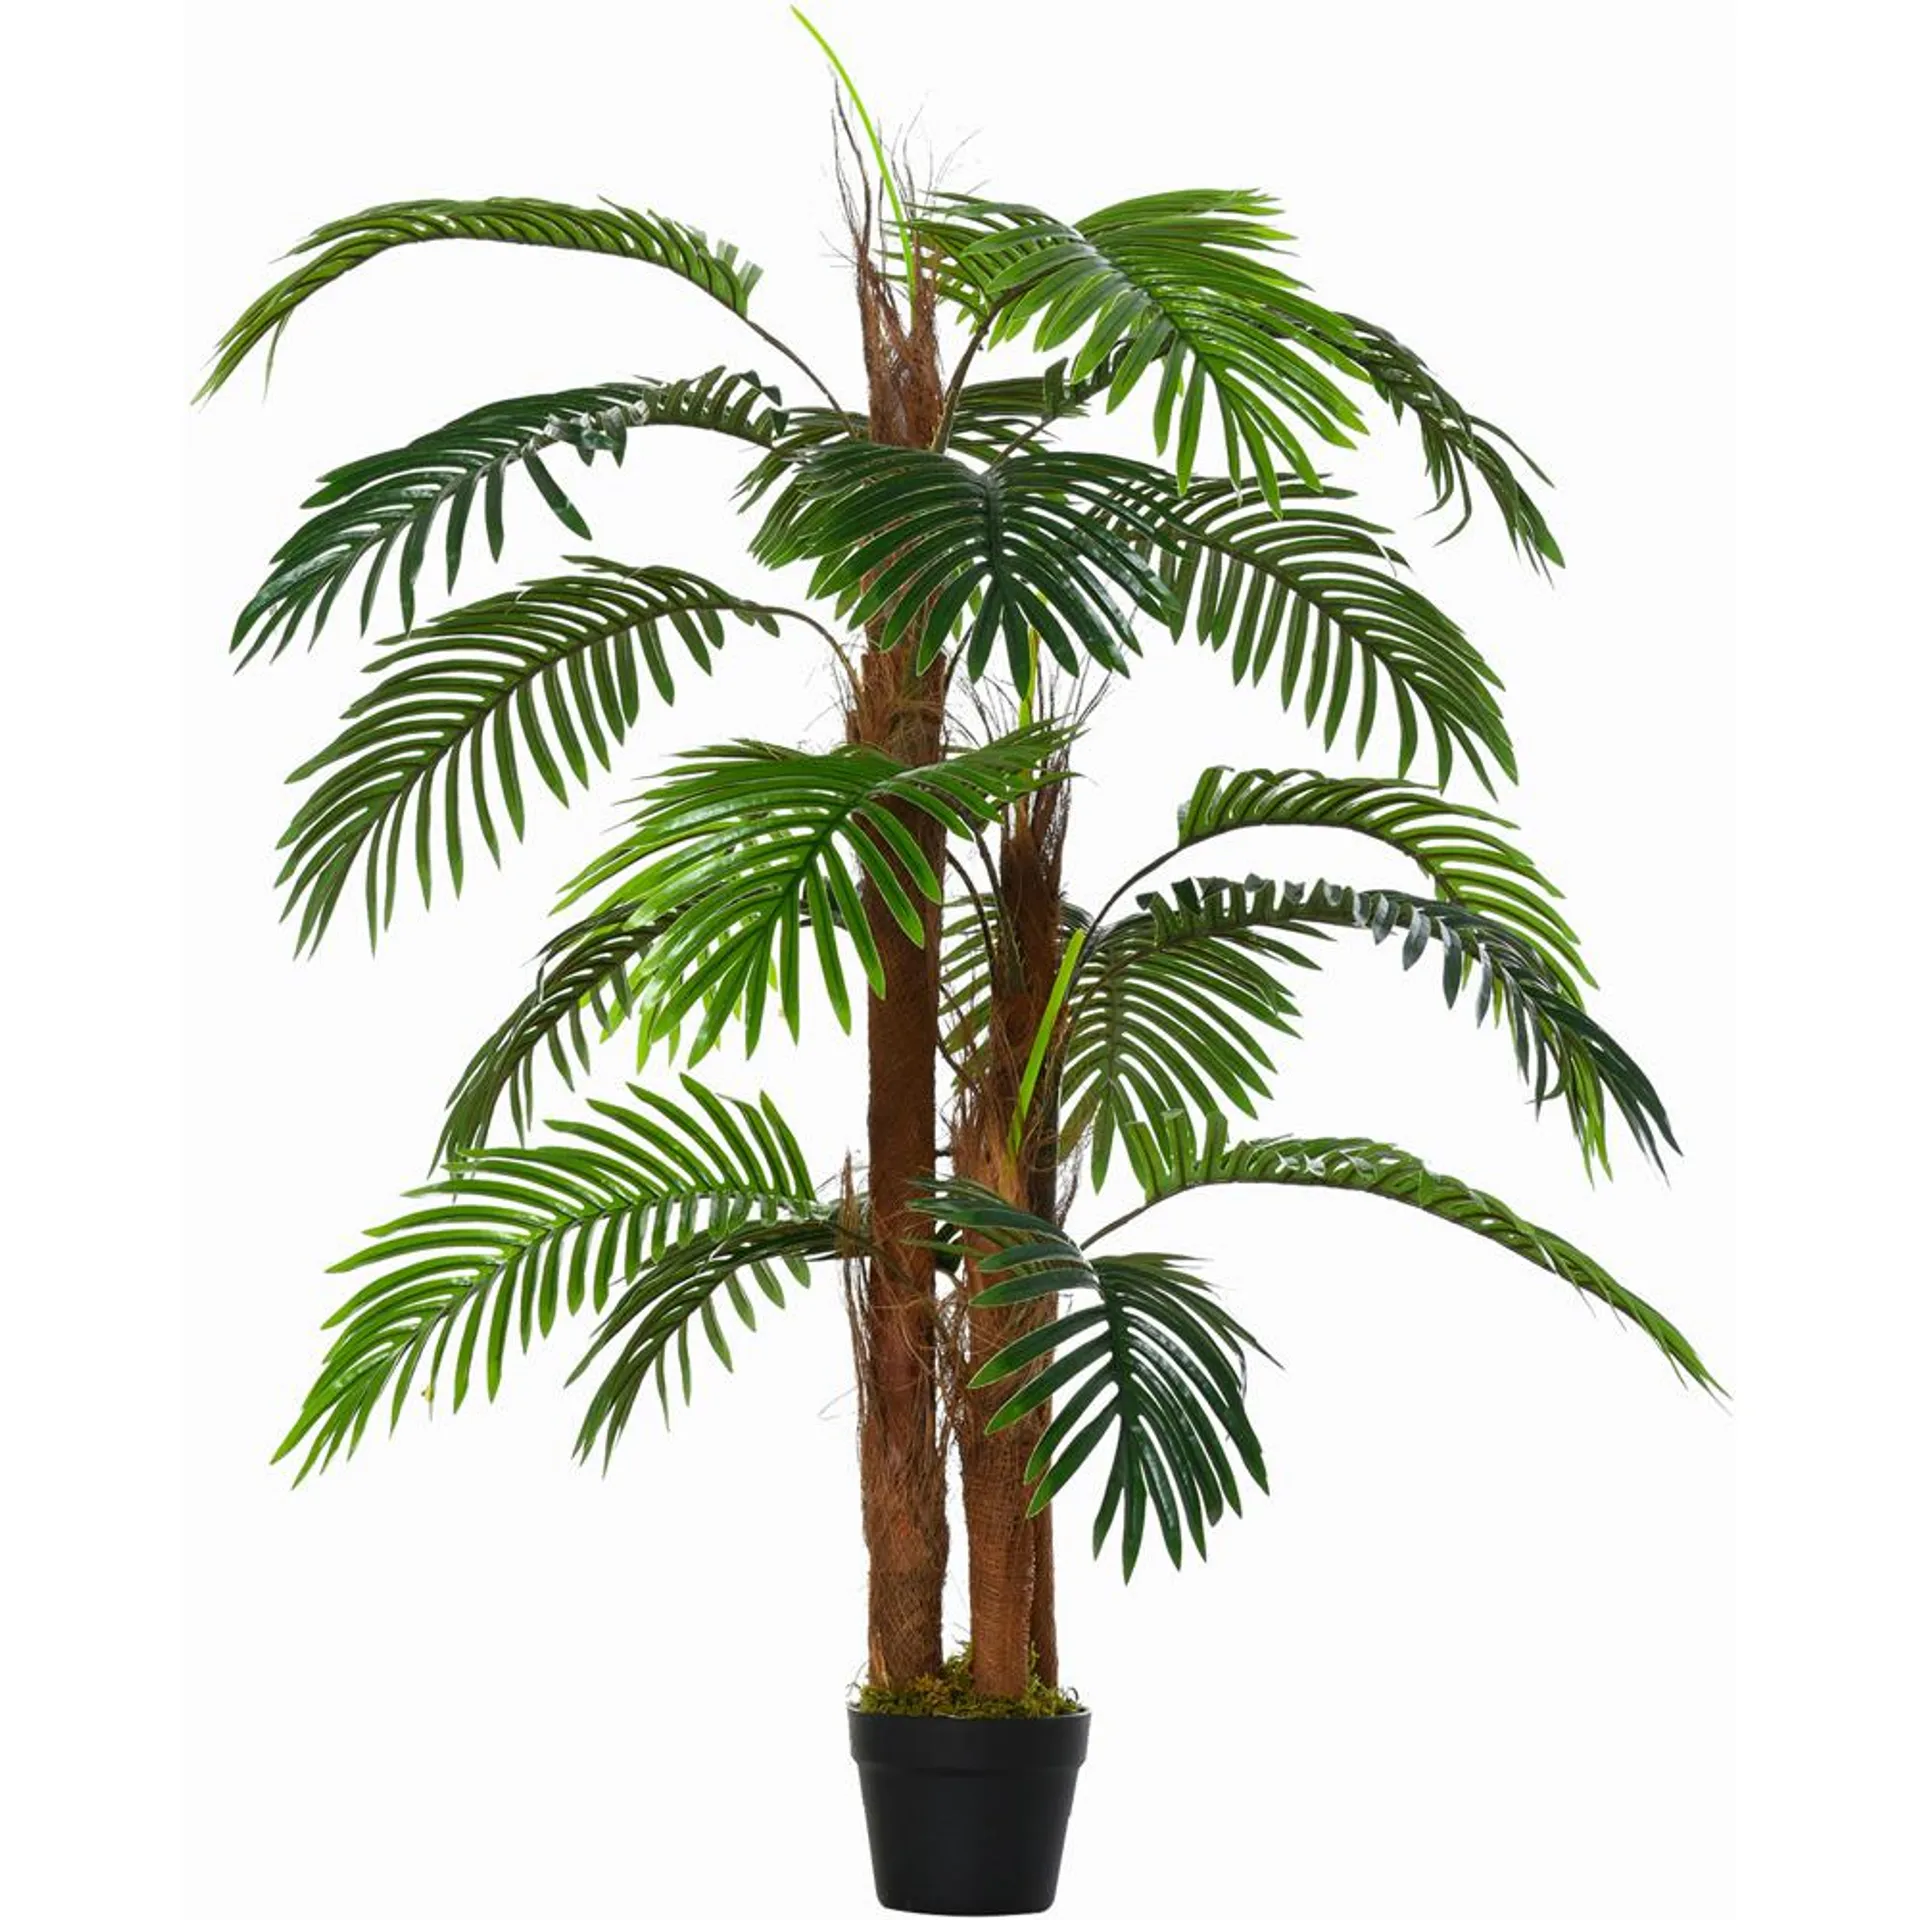 Outsunny Tropical Palm Tree Artificial Plant In Pot 4ft